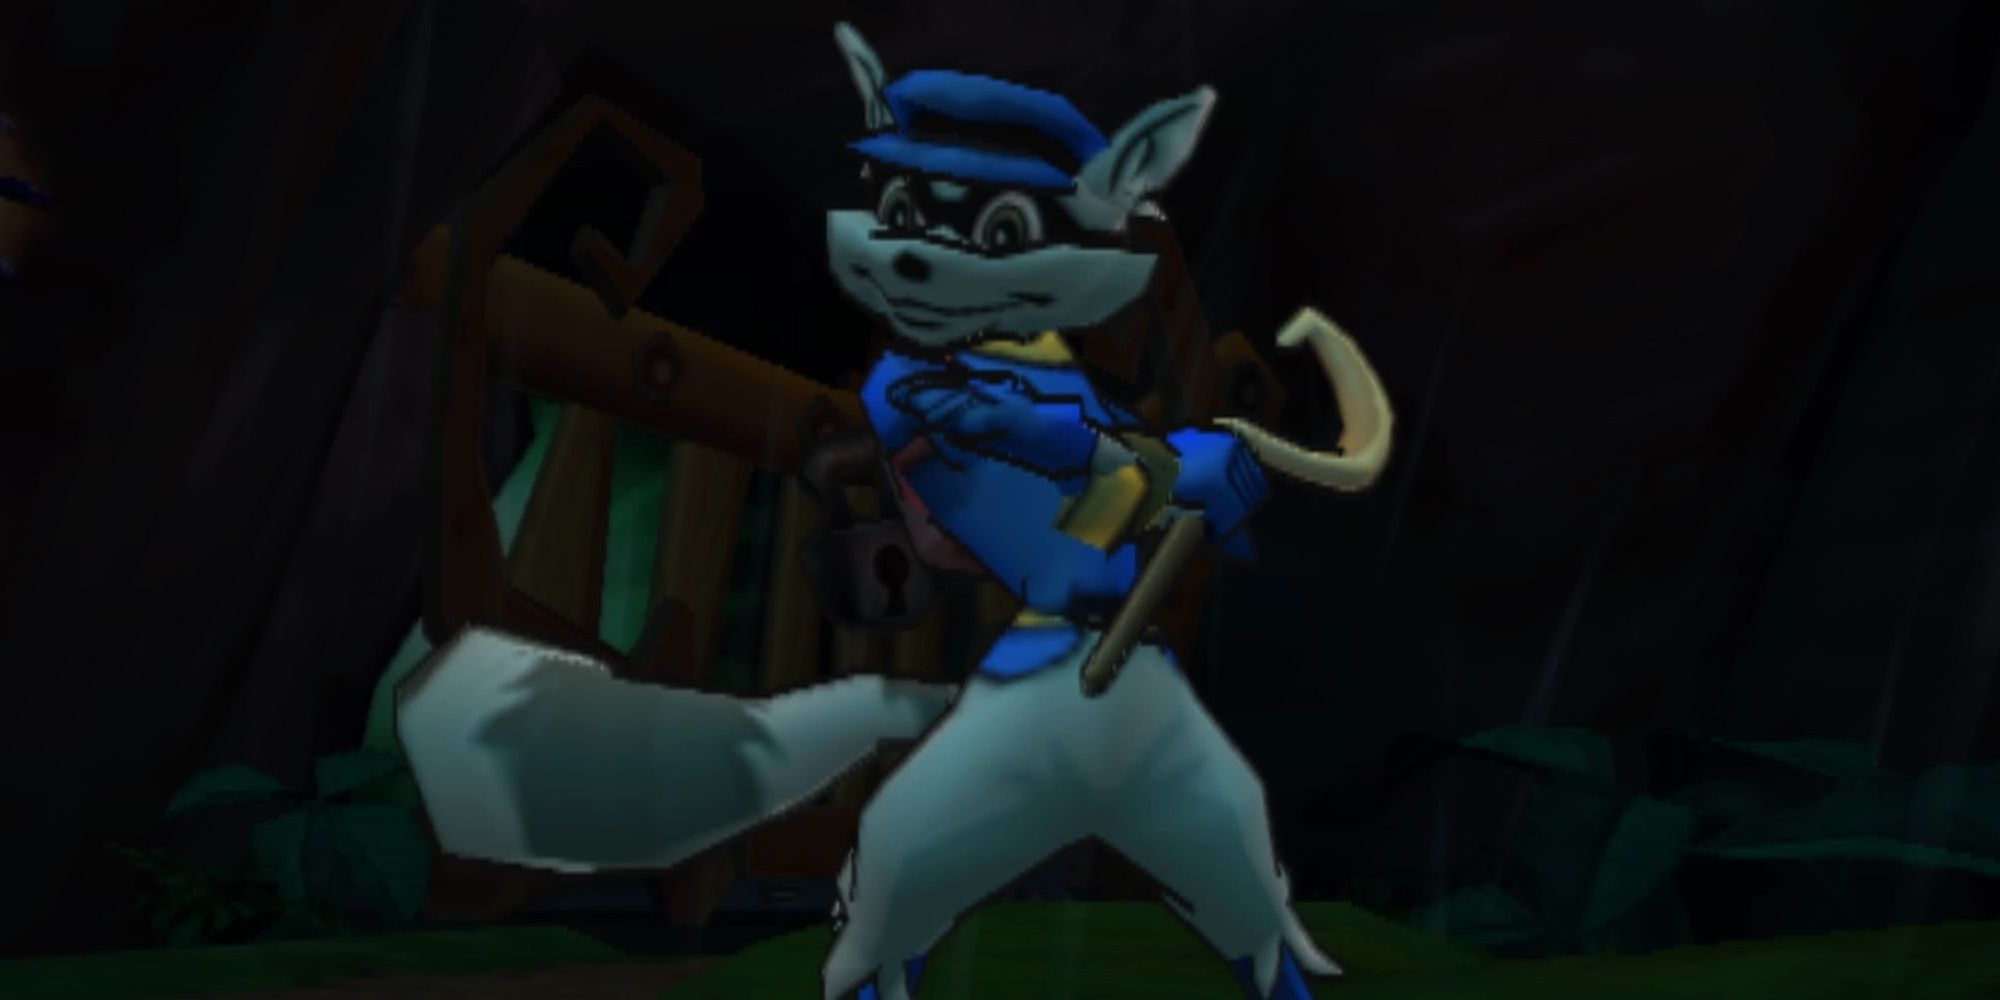 Sly Cooper gameplay